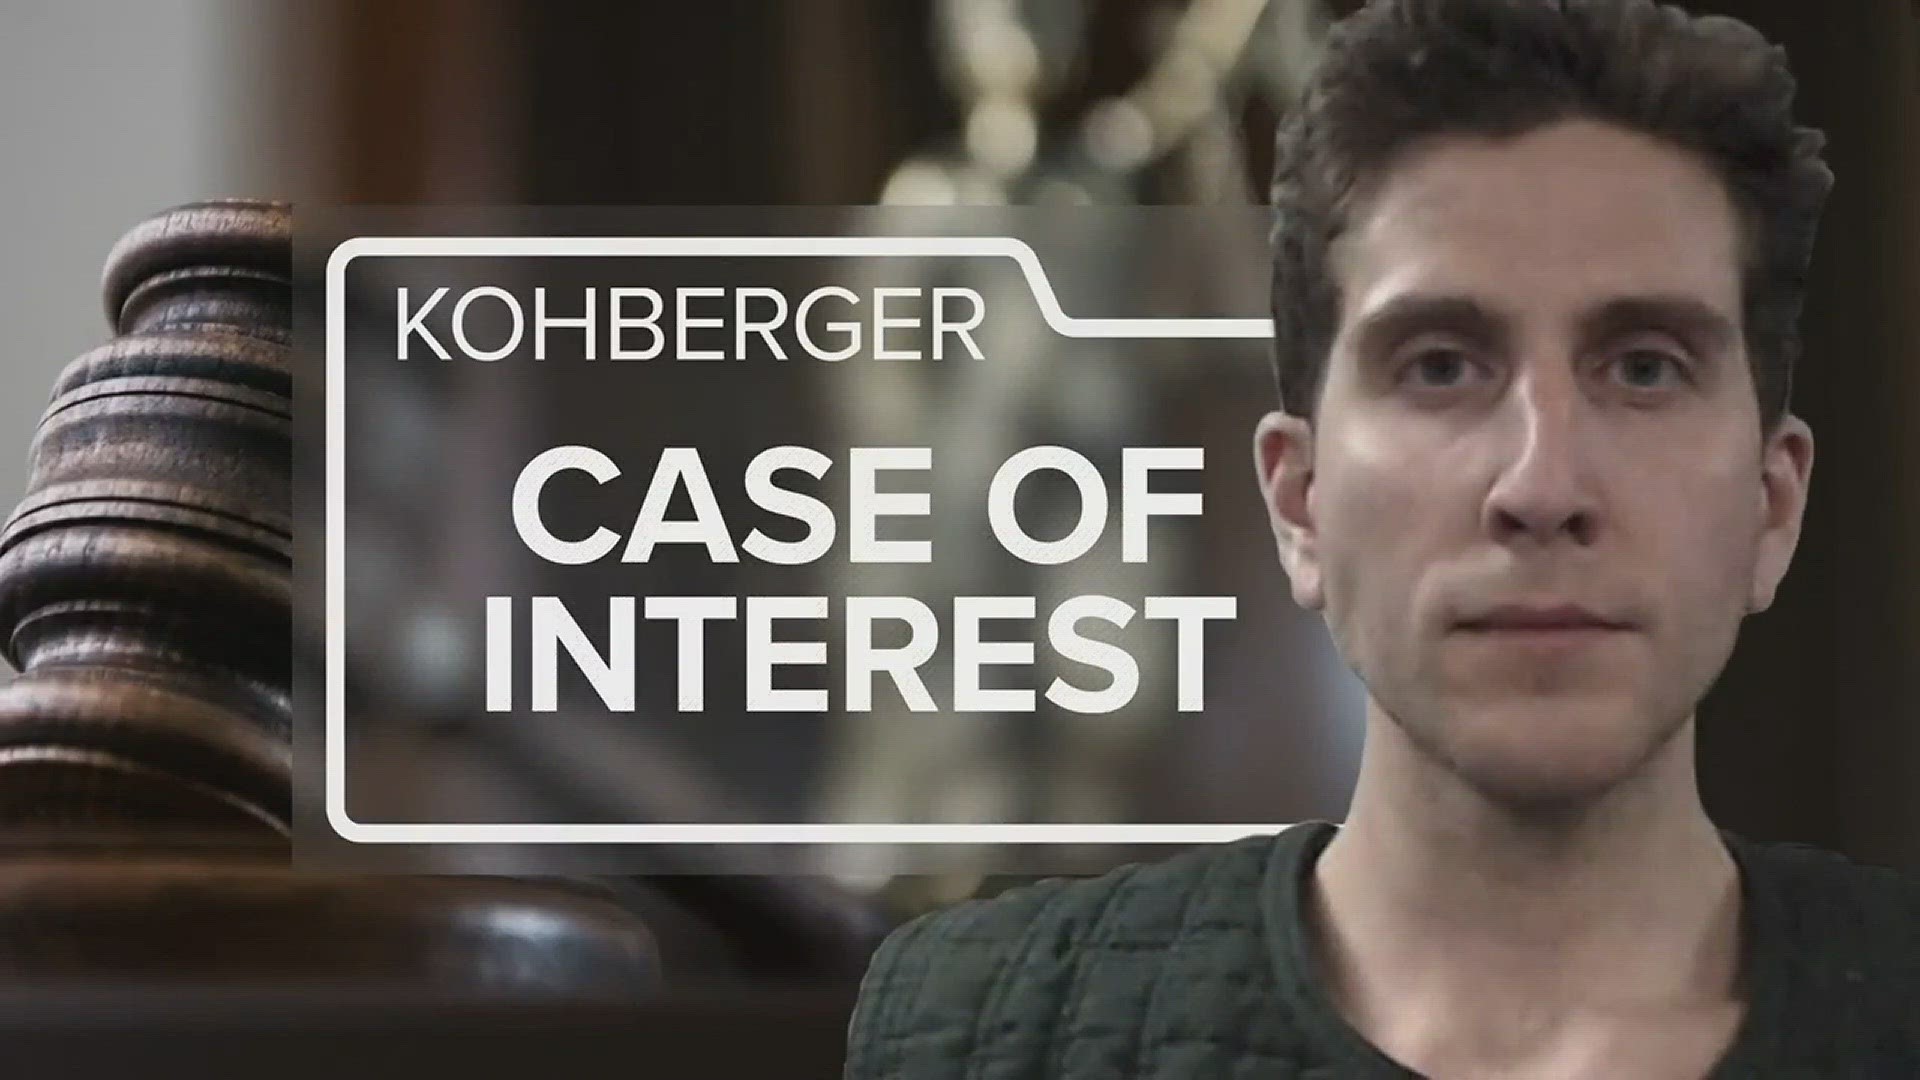 In this edition of Case of Interest: Kohberger, Bryan Kohberger's defense attorney asks for backup. What a co-counsel could mean for the case.